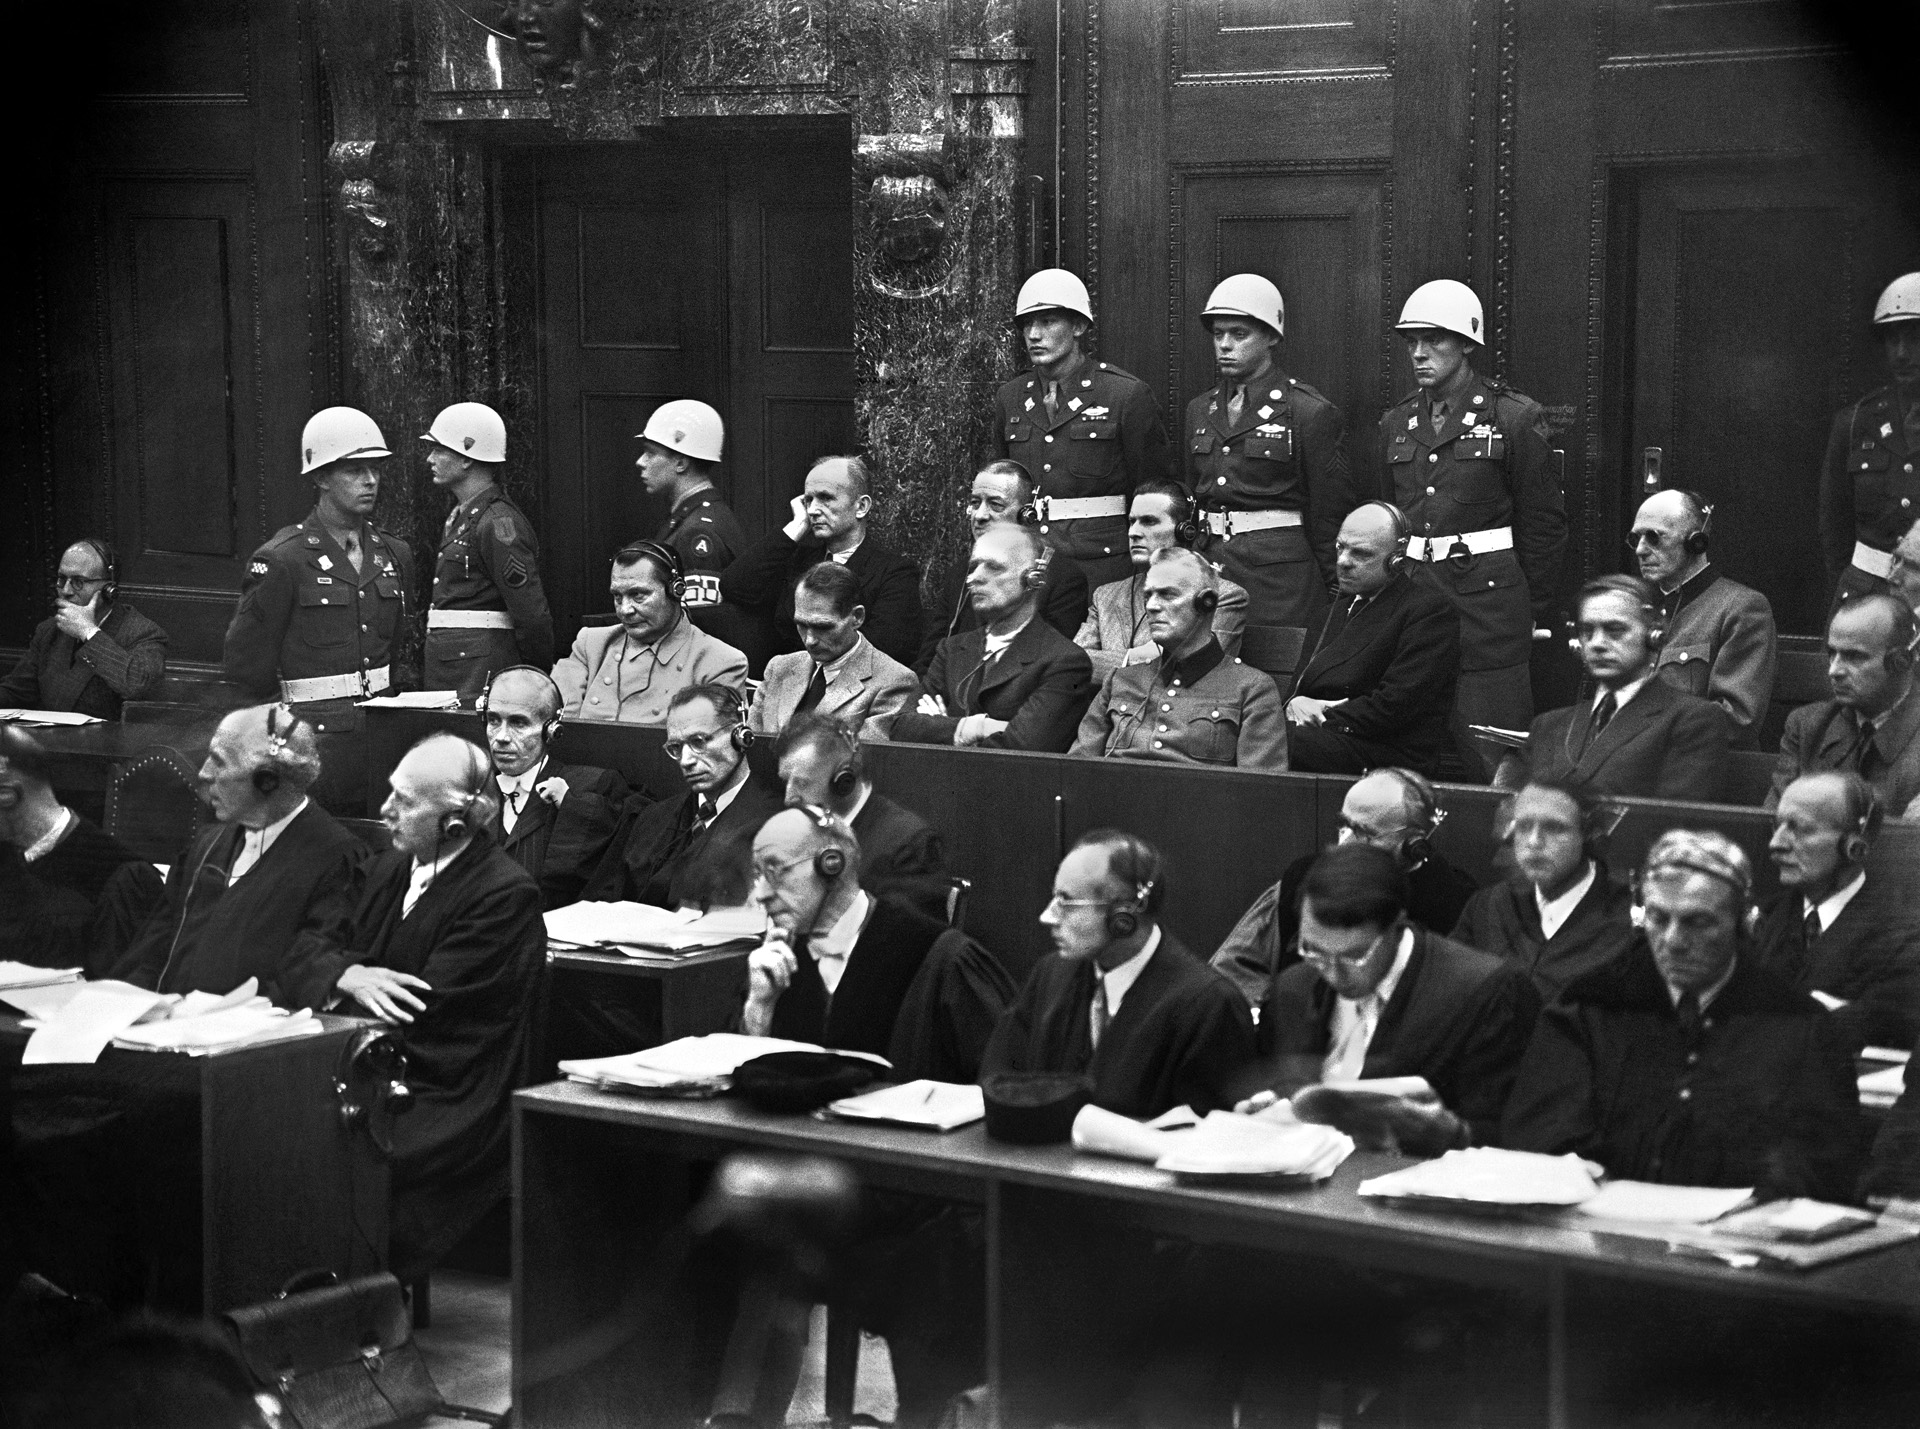 Twenty-two members of the Nazi regime on trial at Nuremberg for their part in war crimes. This, the first of 13 tribunals, lasted 11 months—from November 1945 until October 1946. Ten men were hanged; three committed suicide in prison.